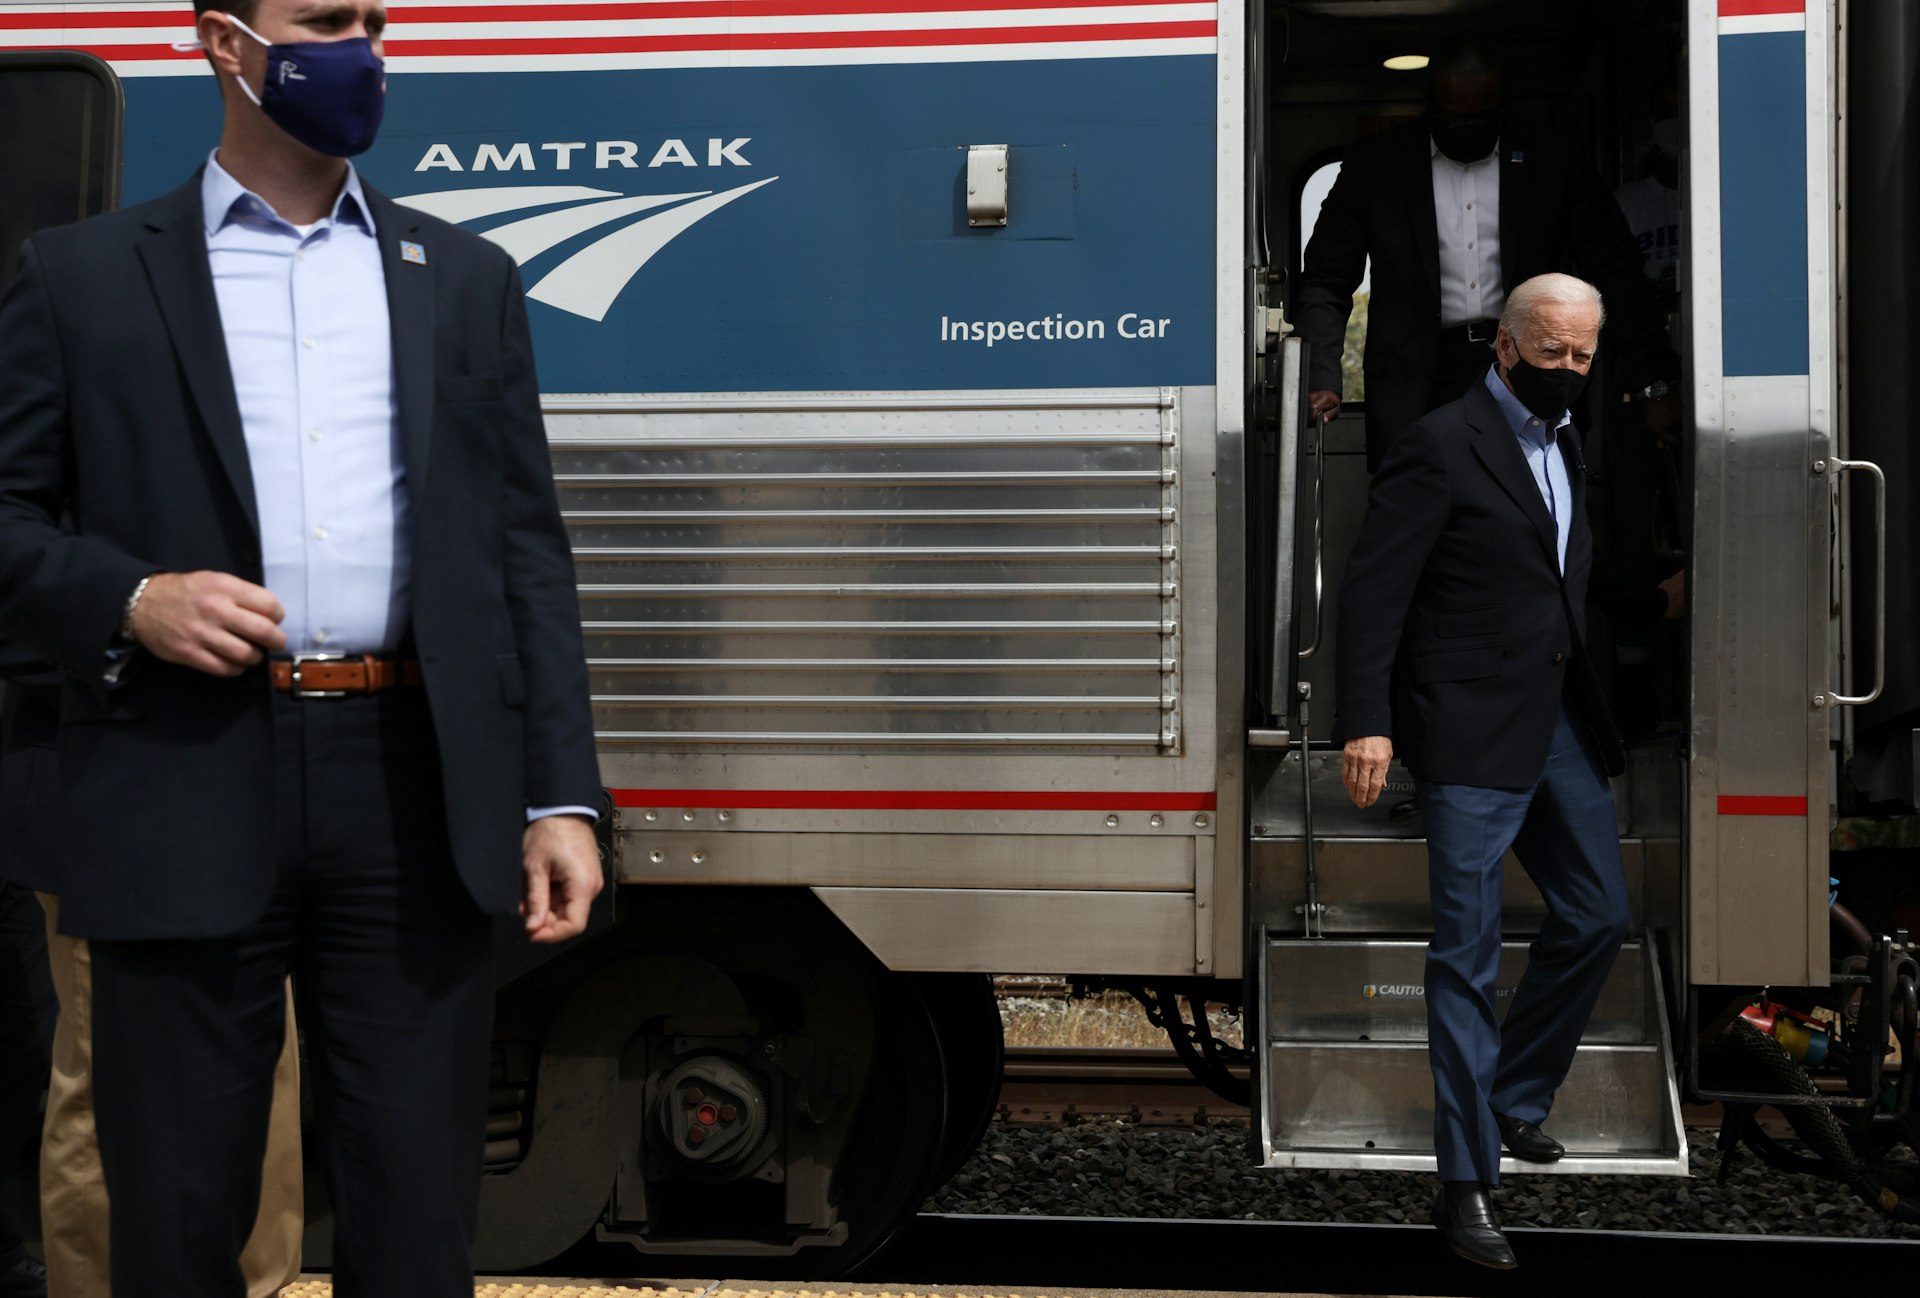 Joe Biden disembarks at a campaign stop at Alliance Amtrak Station in Alliance, Ohio. A secret service man is positioned to the right of the photo and another is disembarking the train directly behind him  